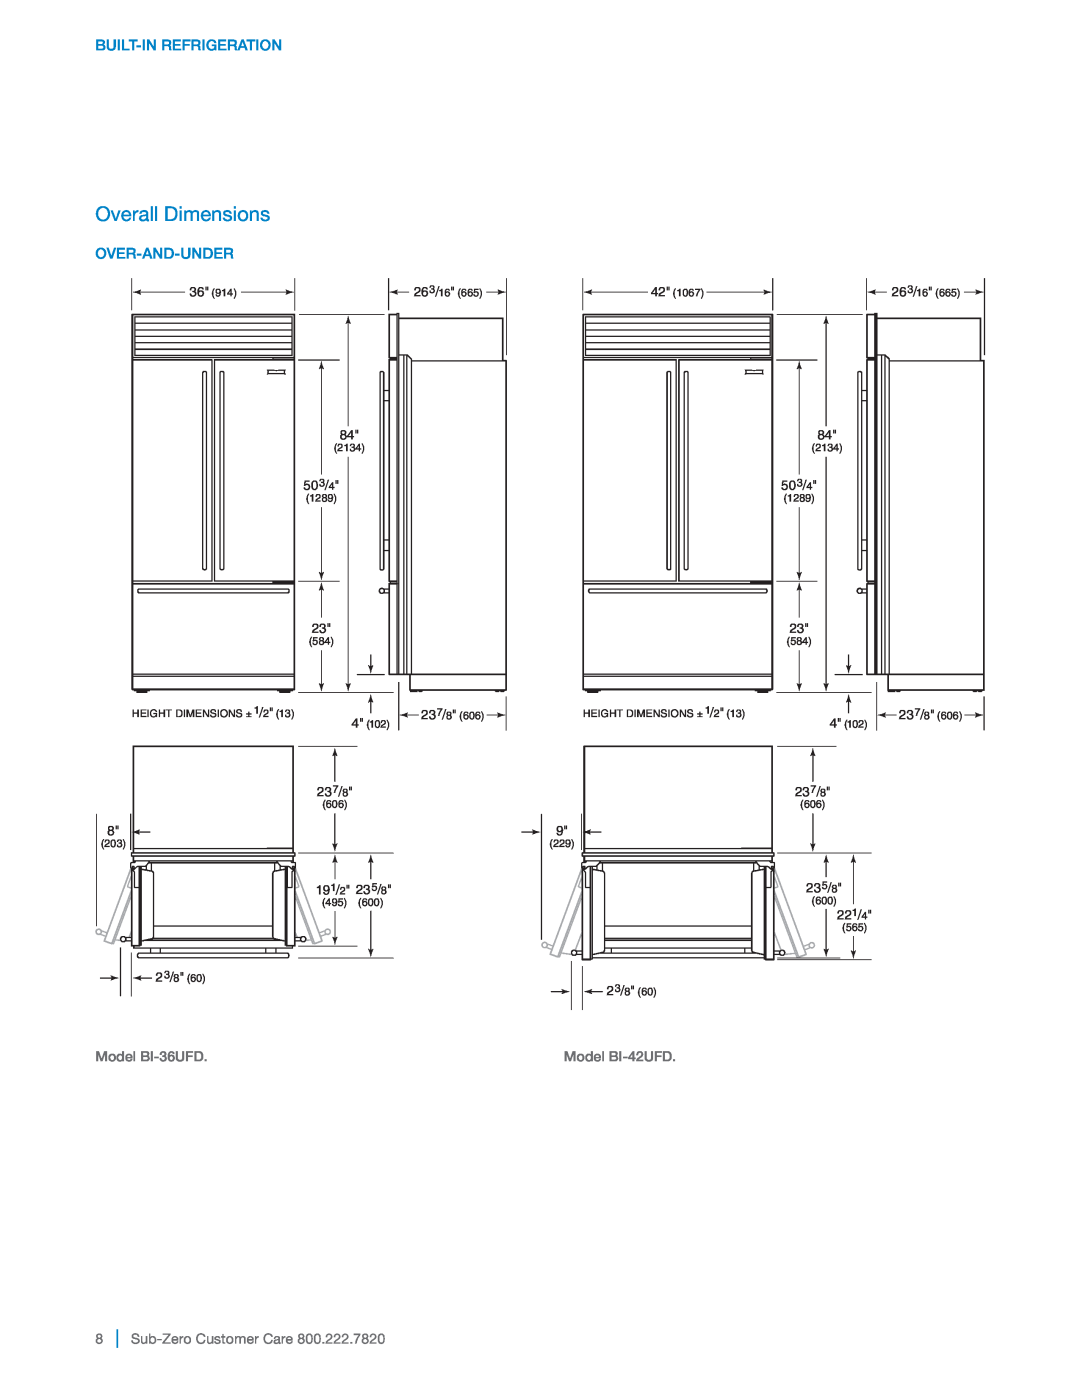 Sub-Zero BI-36UG manual Overall Dimensions, Built-In Refrigeration, Over-And-Under, 503/4, 23/8, 237/8, 191/2 235/8, 23 5/8 